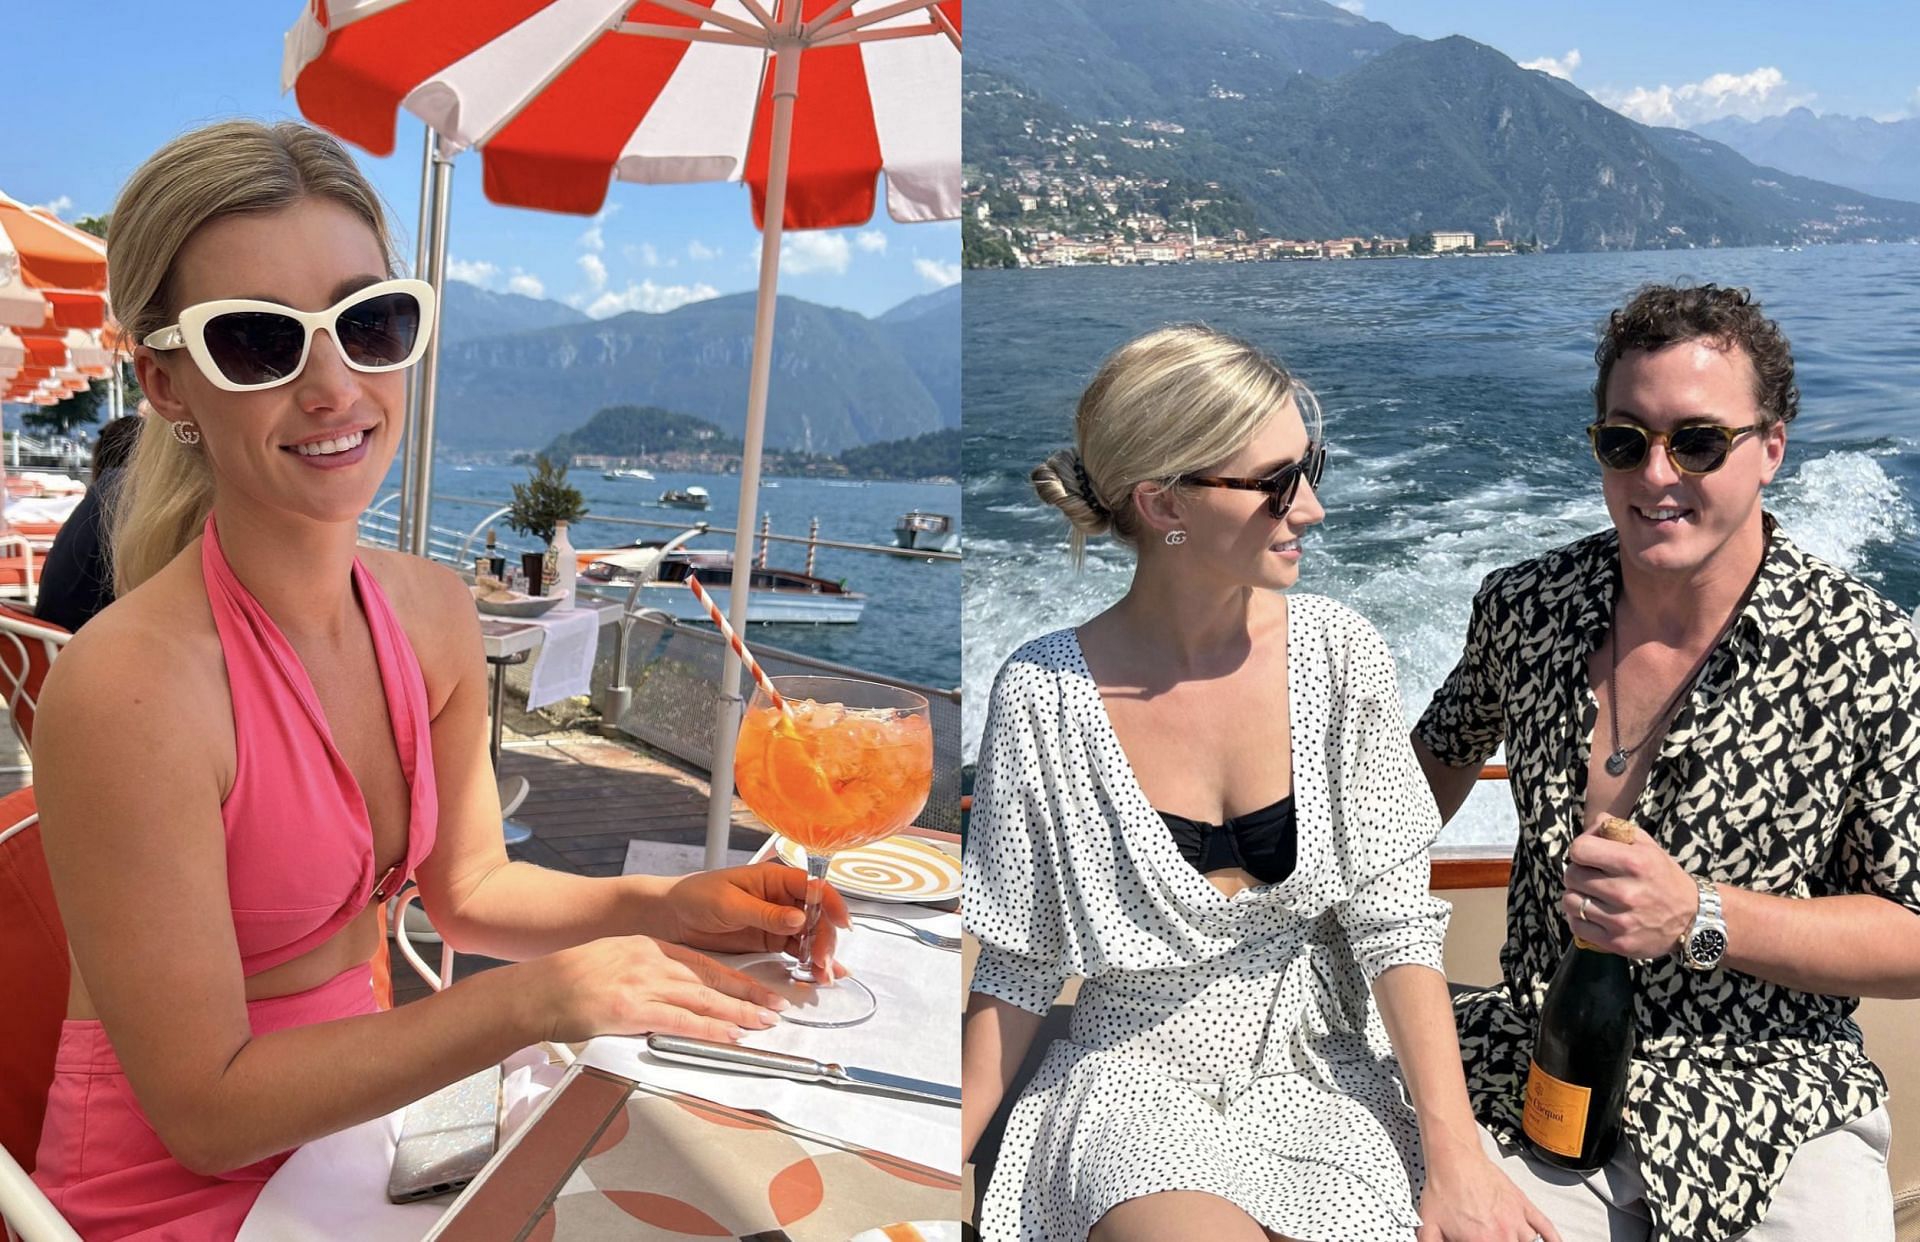 In Photos: Tyson Barrie and wife Emma enjoy scenic beauties of Lake Como